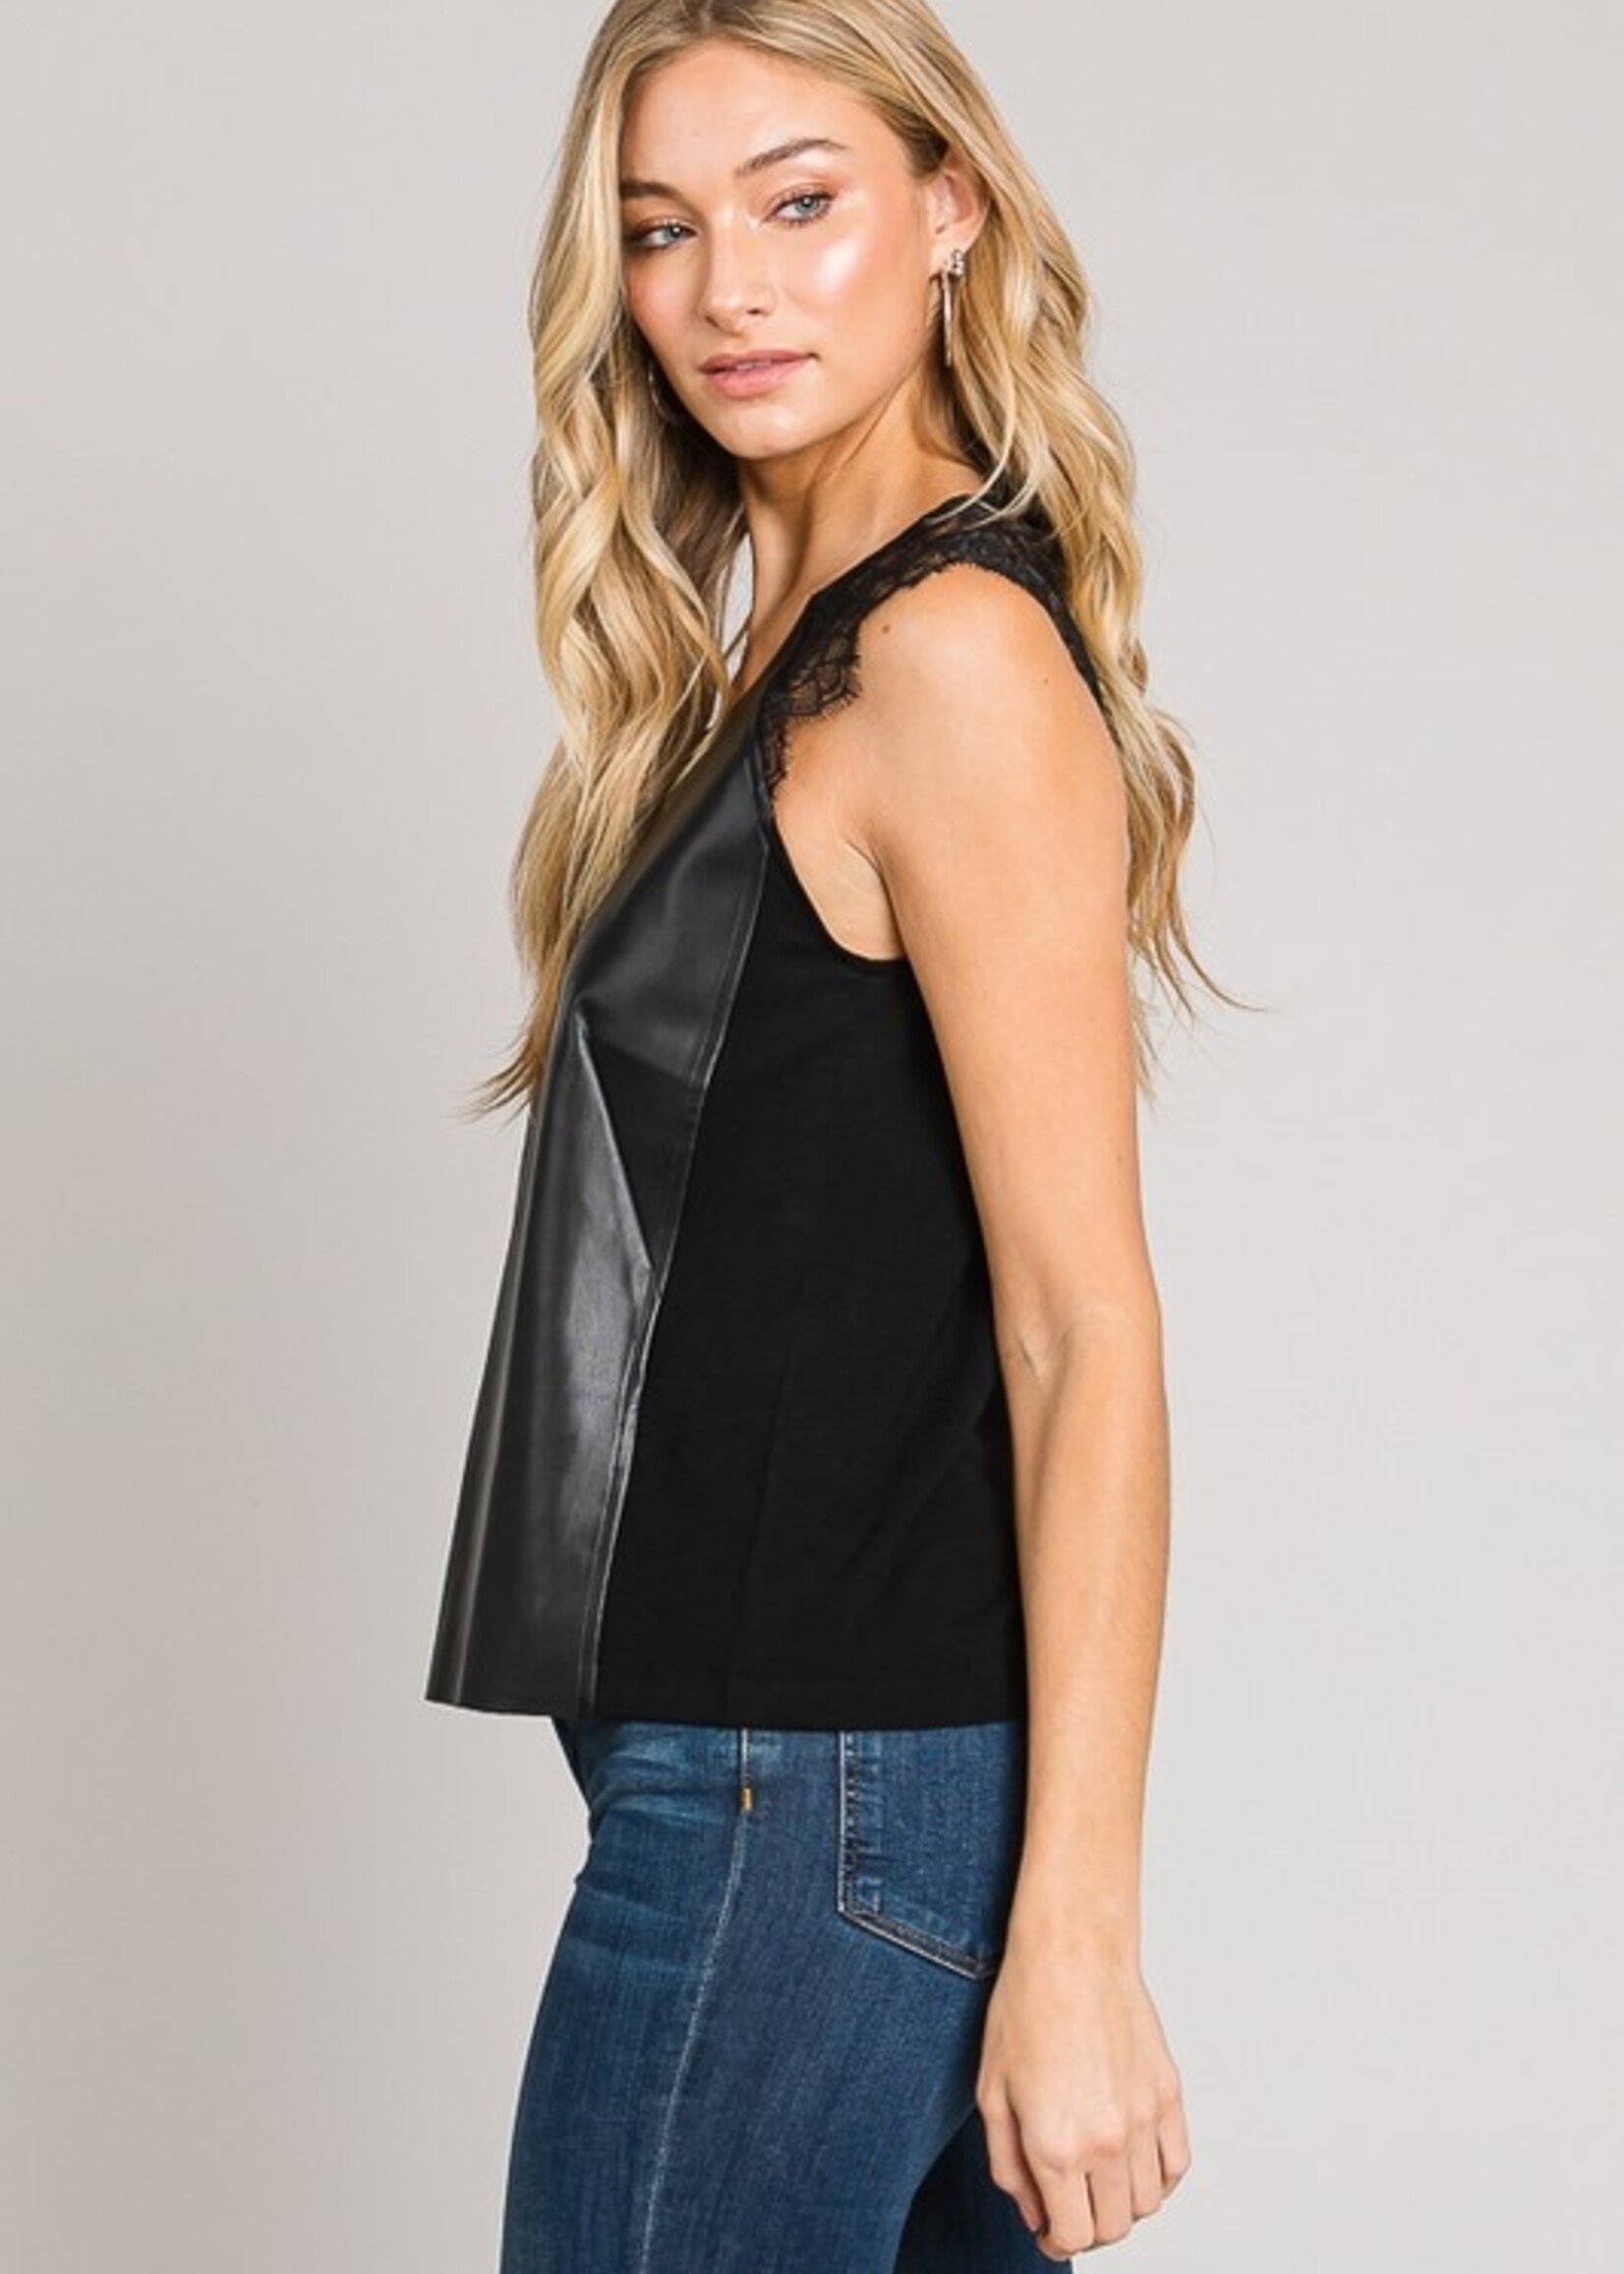 Lace detail leather tank